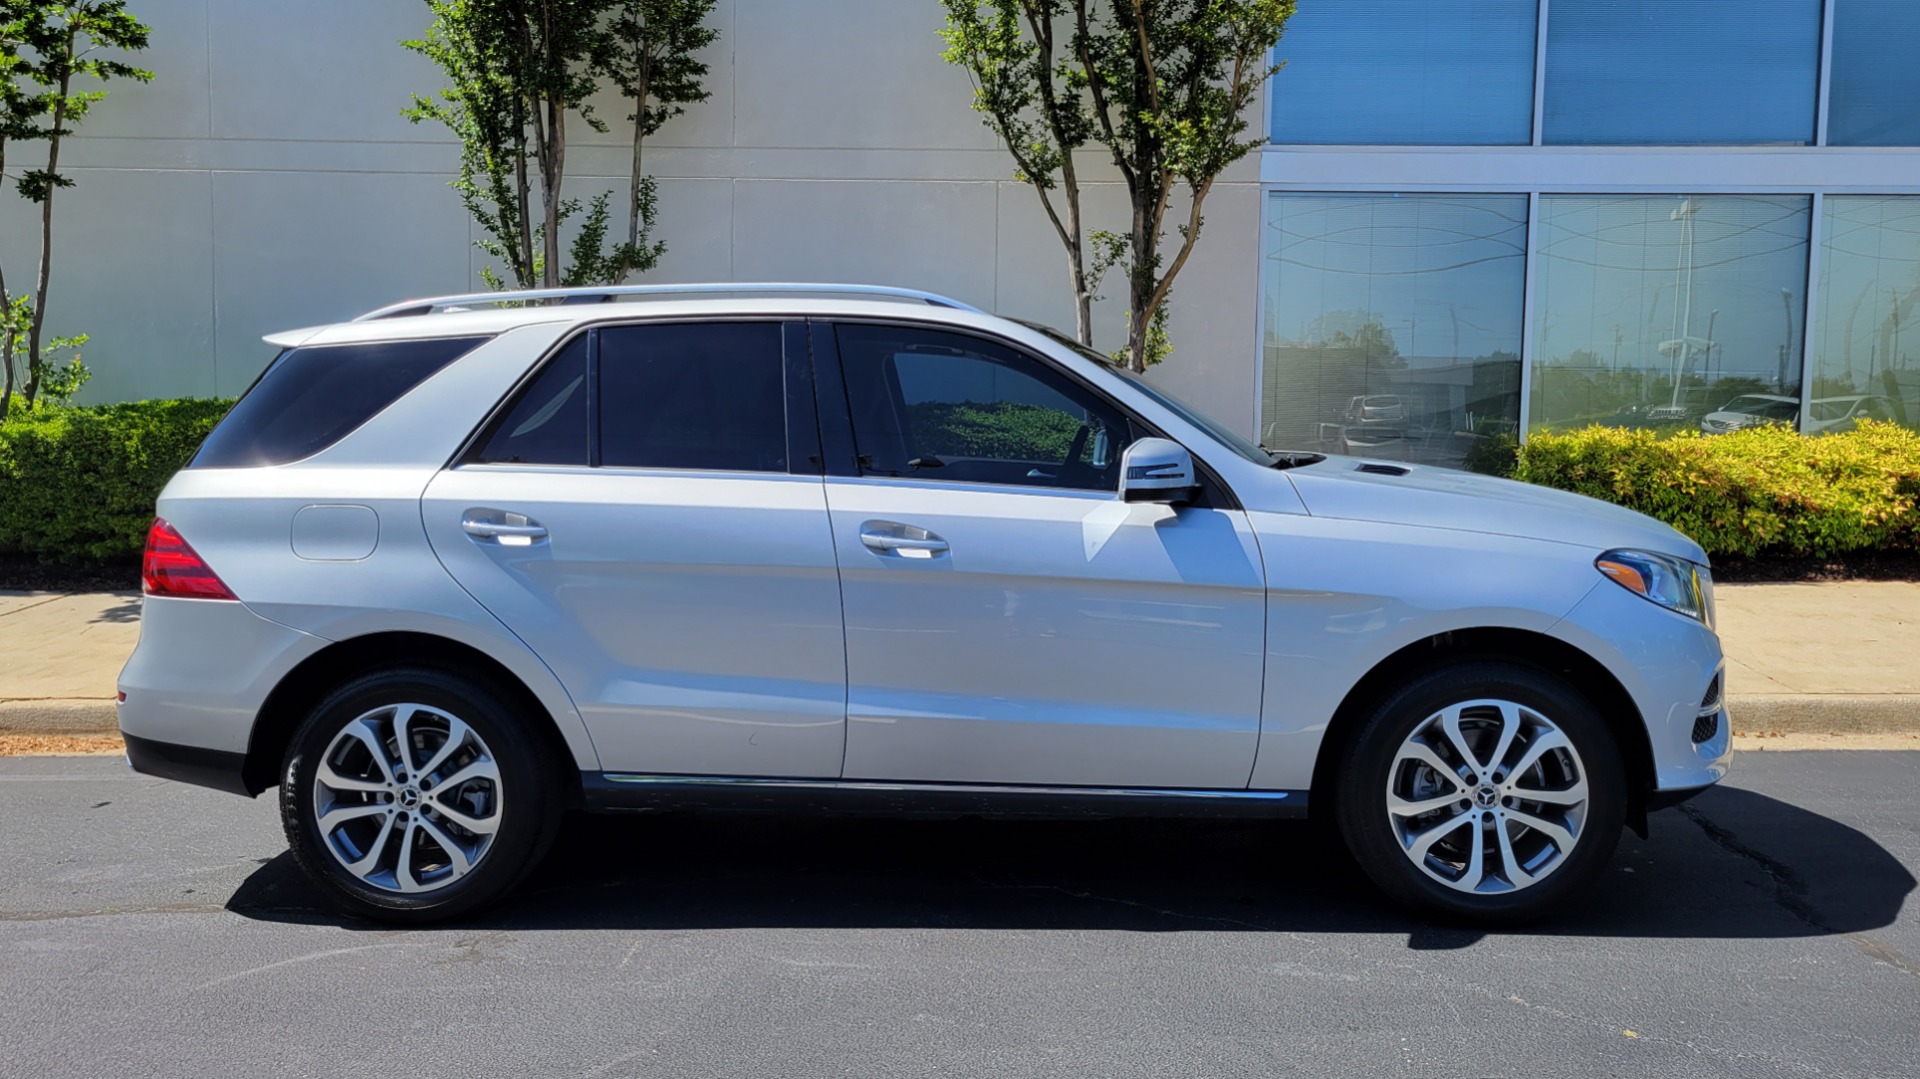 Used 2017 Mercedes-Benz GLE 350 PREMIUM / NAV / PANO-ROOF / H/KJ SND / BSA / REARVIEW for sale $37,495 at Formula Imports in Charlotte NC 28227 7